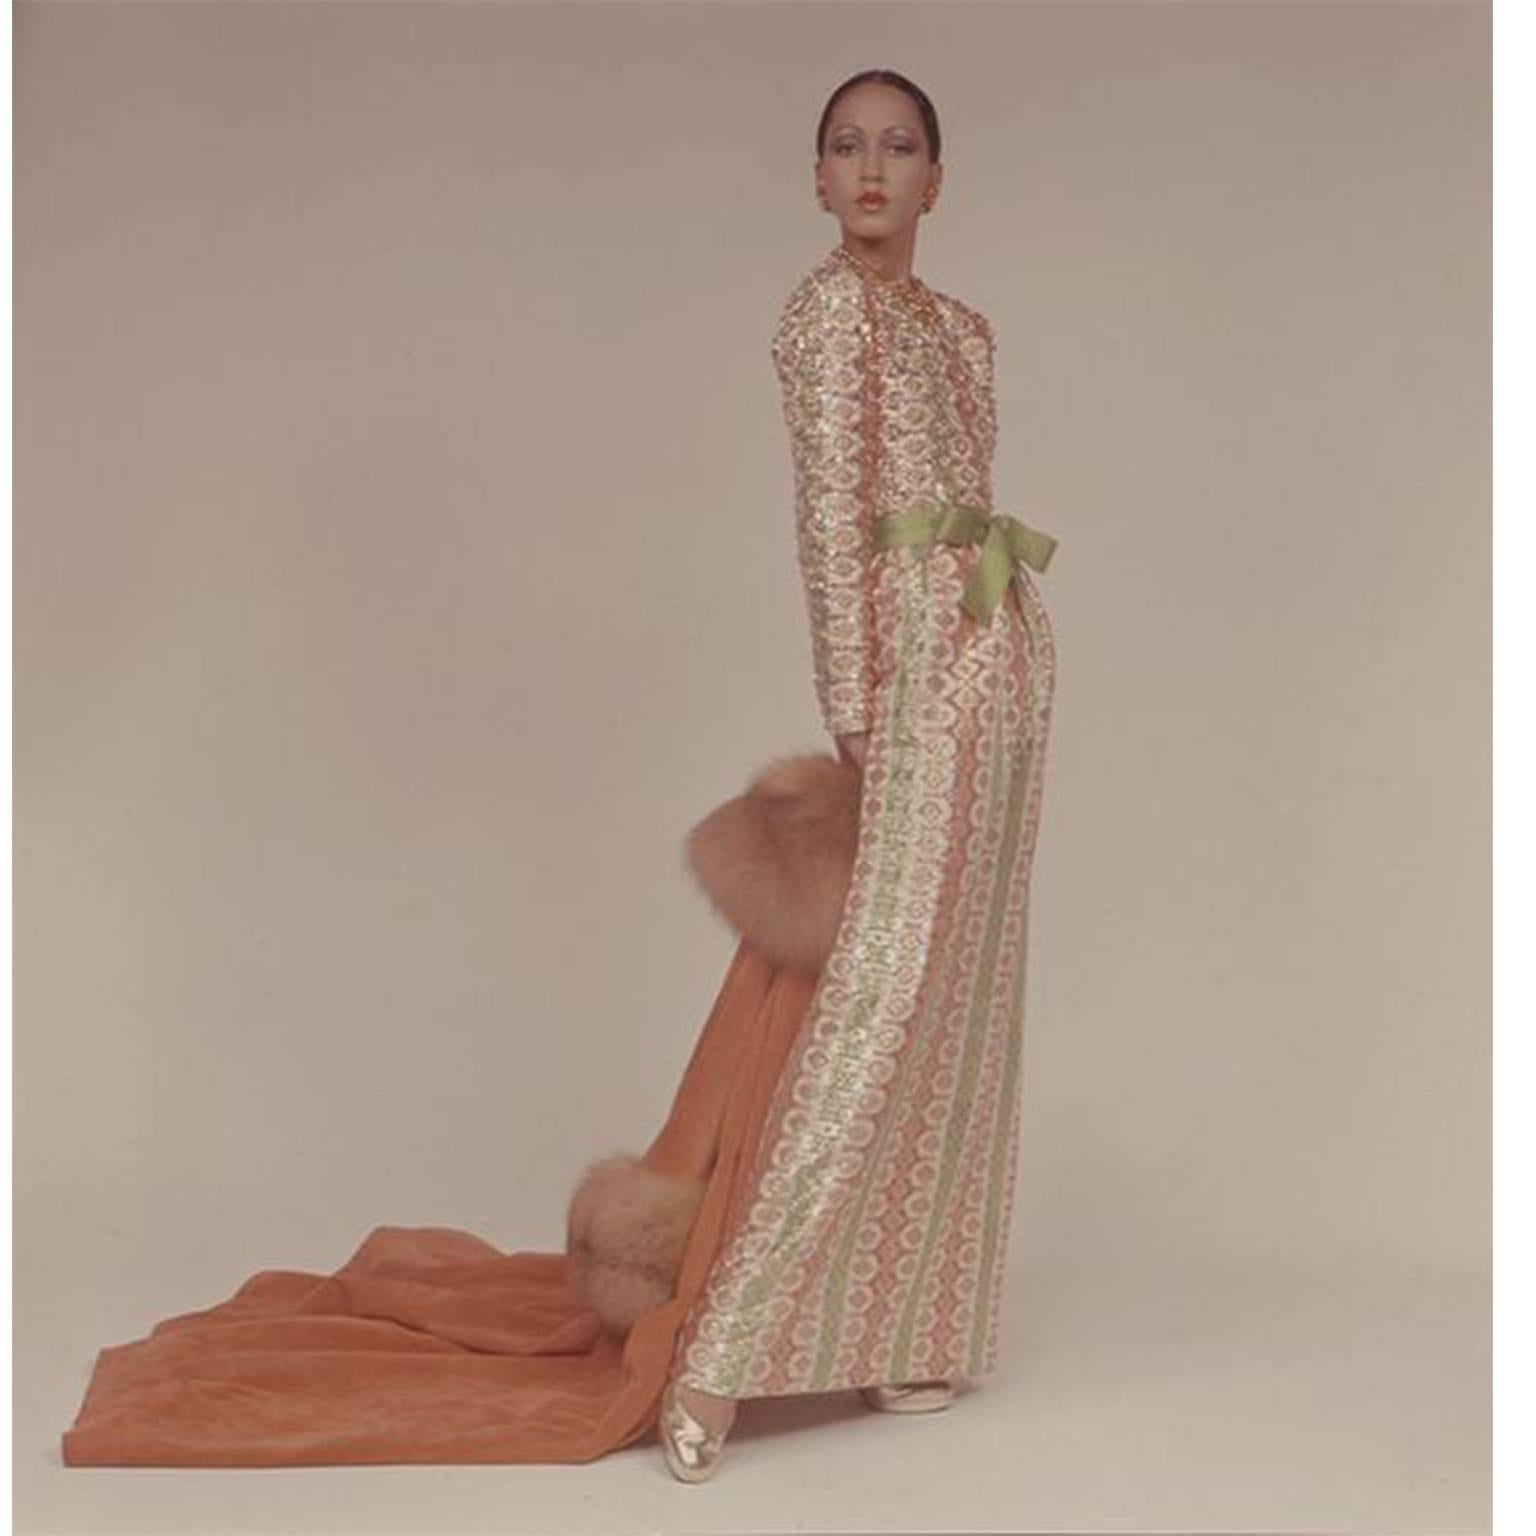 Christian Dior Haute Couture Sequin Evening Dress Gown AW 1971 For Sale 2